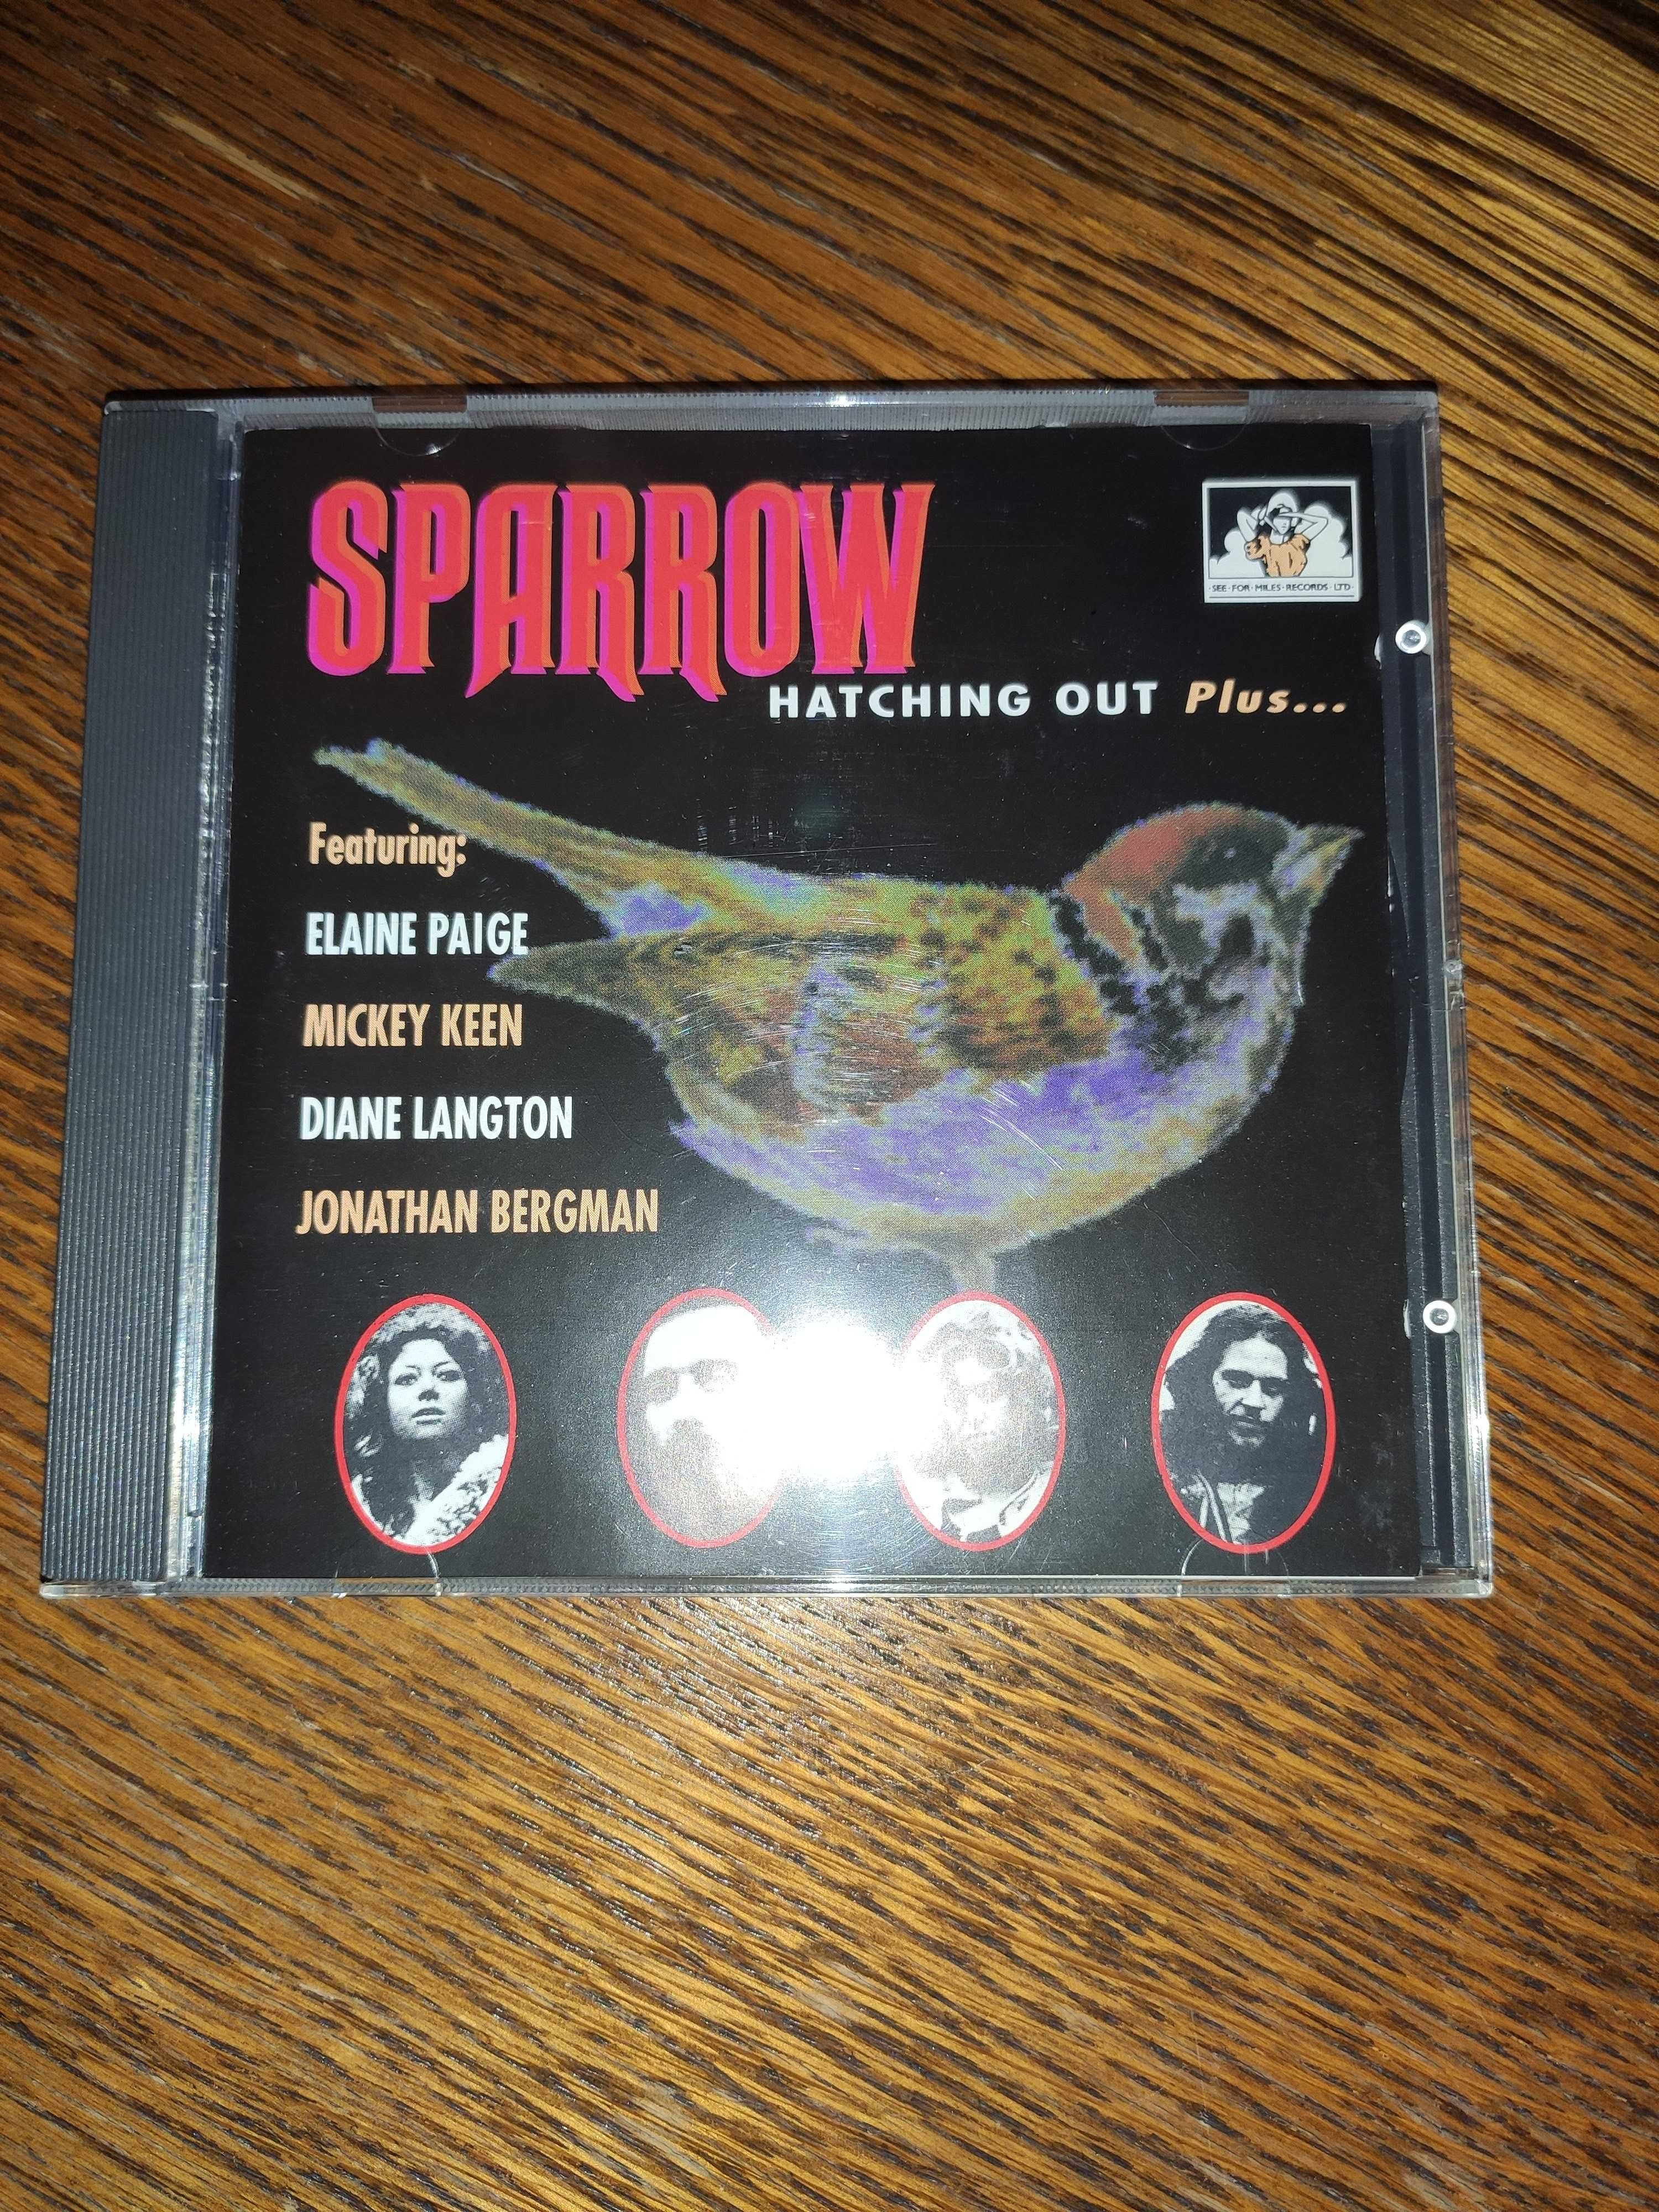 Sparrow - Hatching Out, CD 1995, King Crimson, Jethro Tull